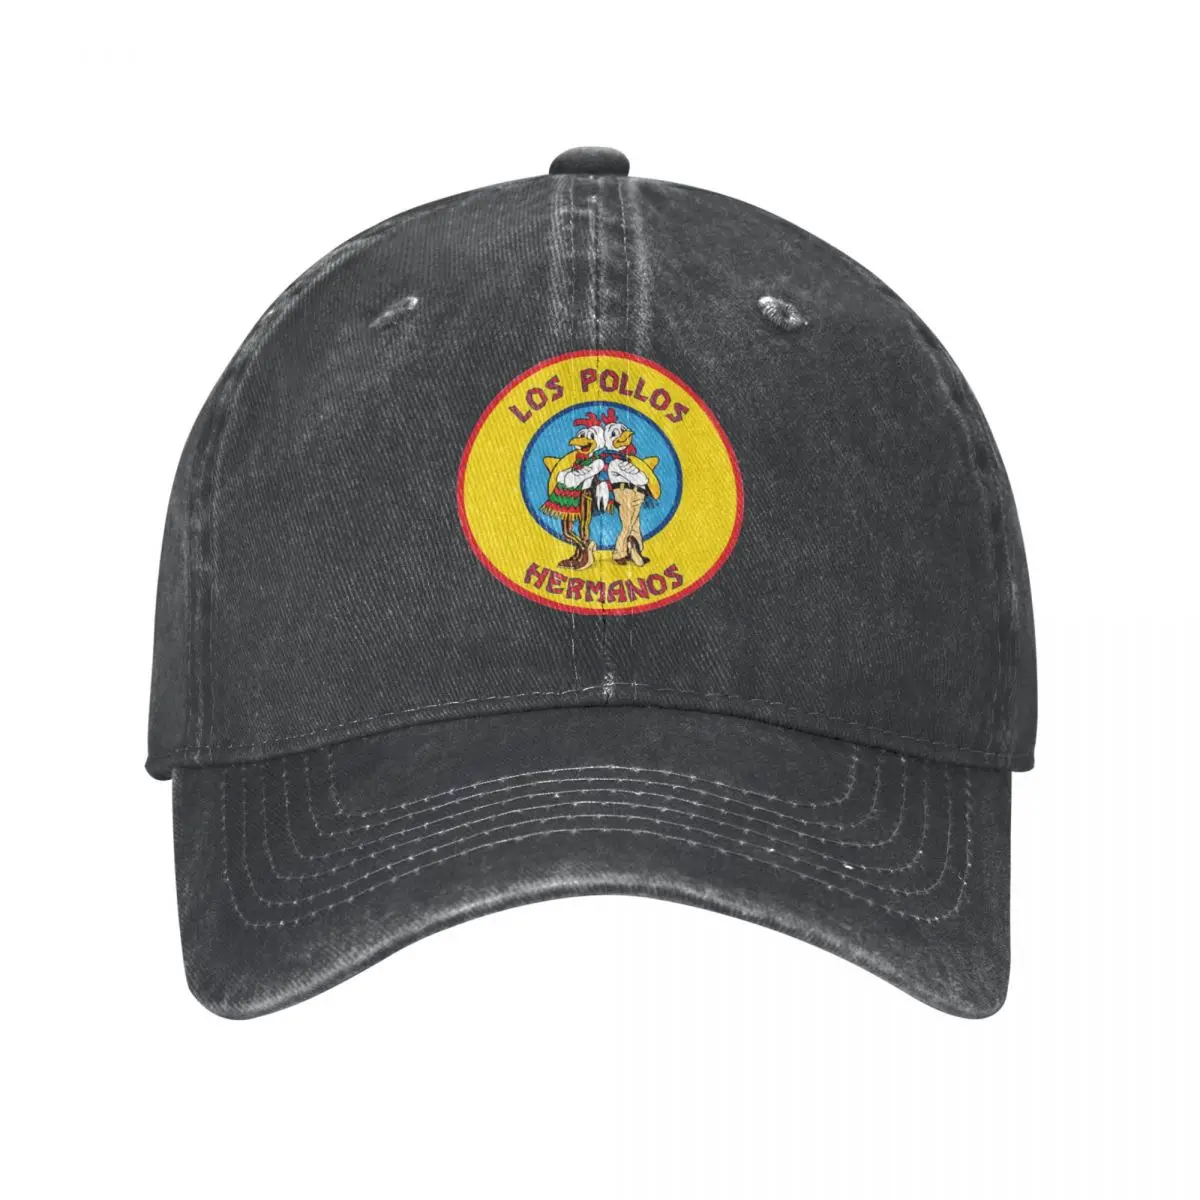 

Los Pollos Hermanos Baseball Caps Casual Distressed Washed Fast Food Snapback Hat Unisex Style Outdoor Activities Hats Cap